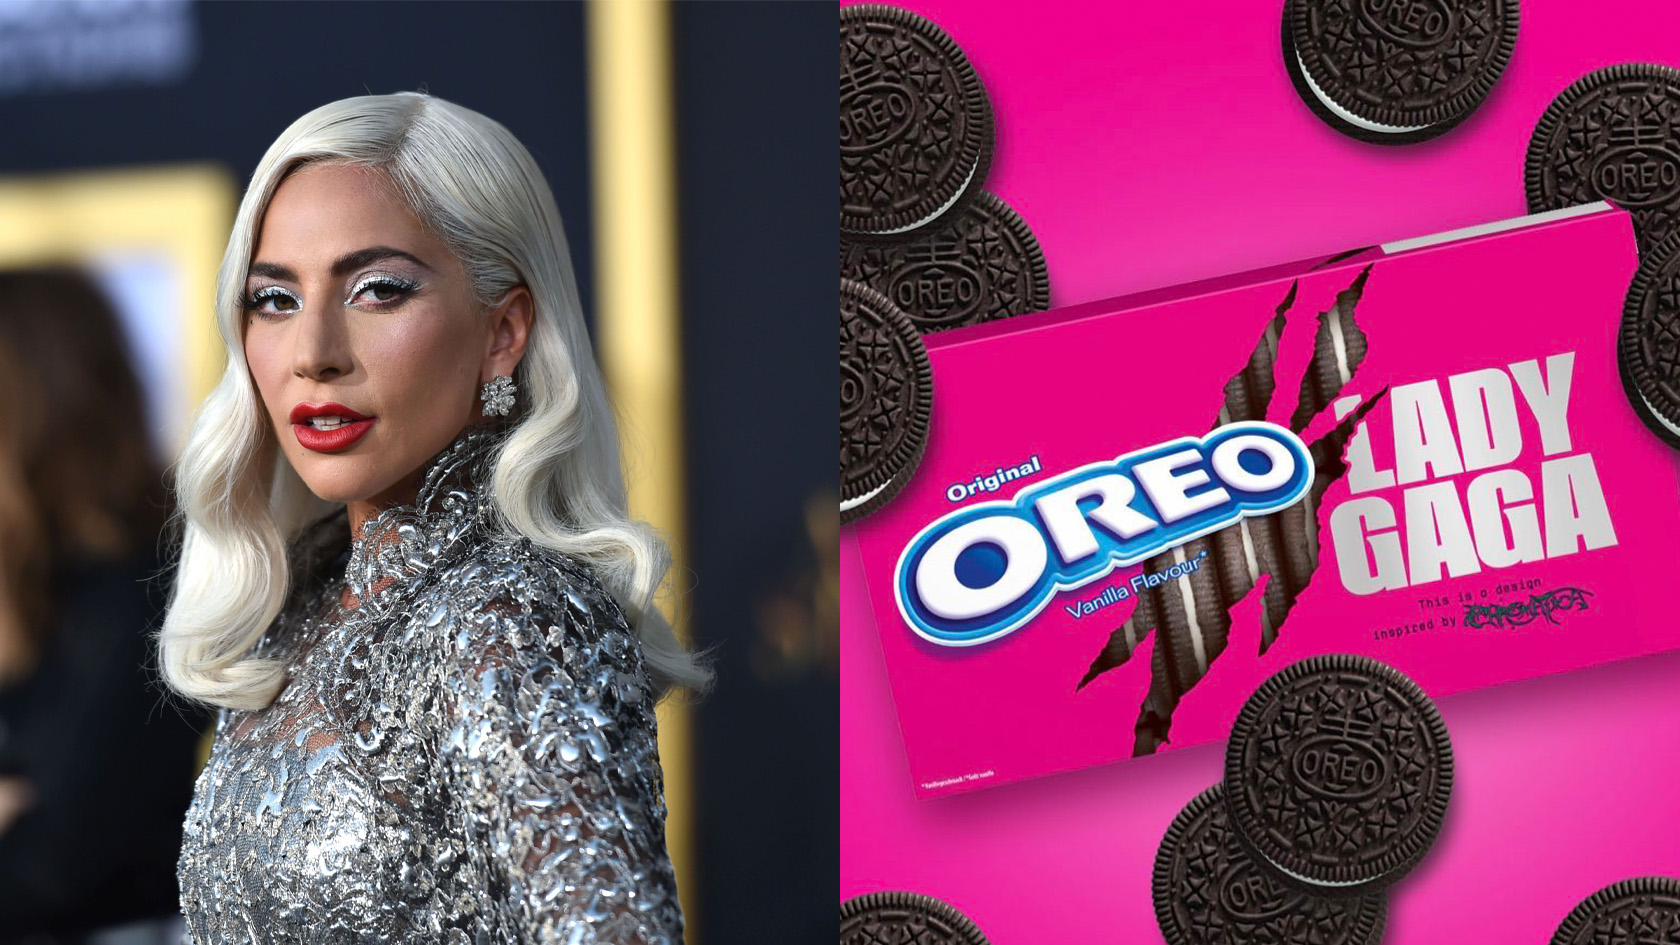 Lady Gaga s Chromatica Oreos Have Hit The Shelves amp They Look Tasty 